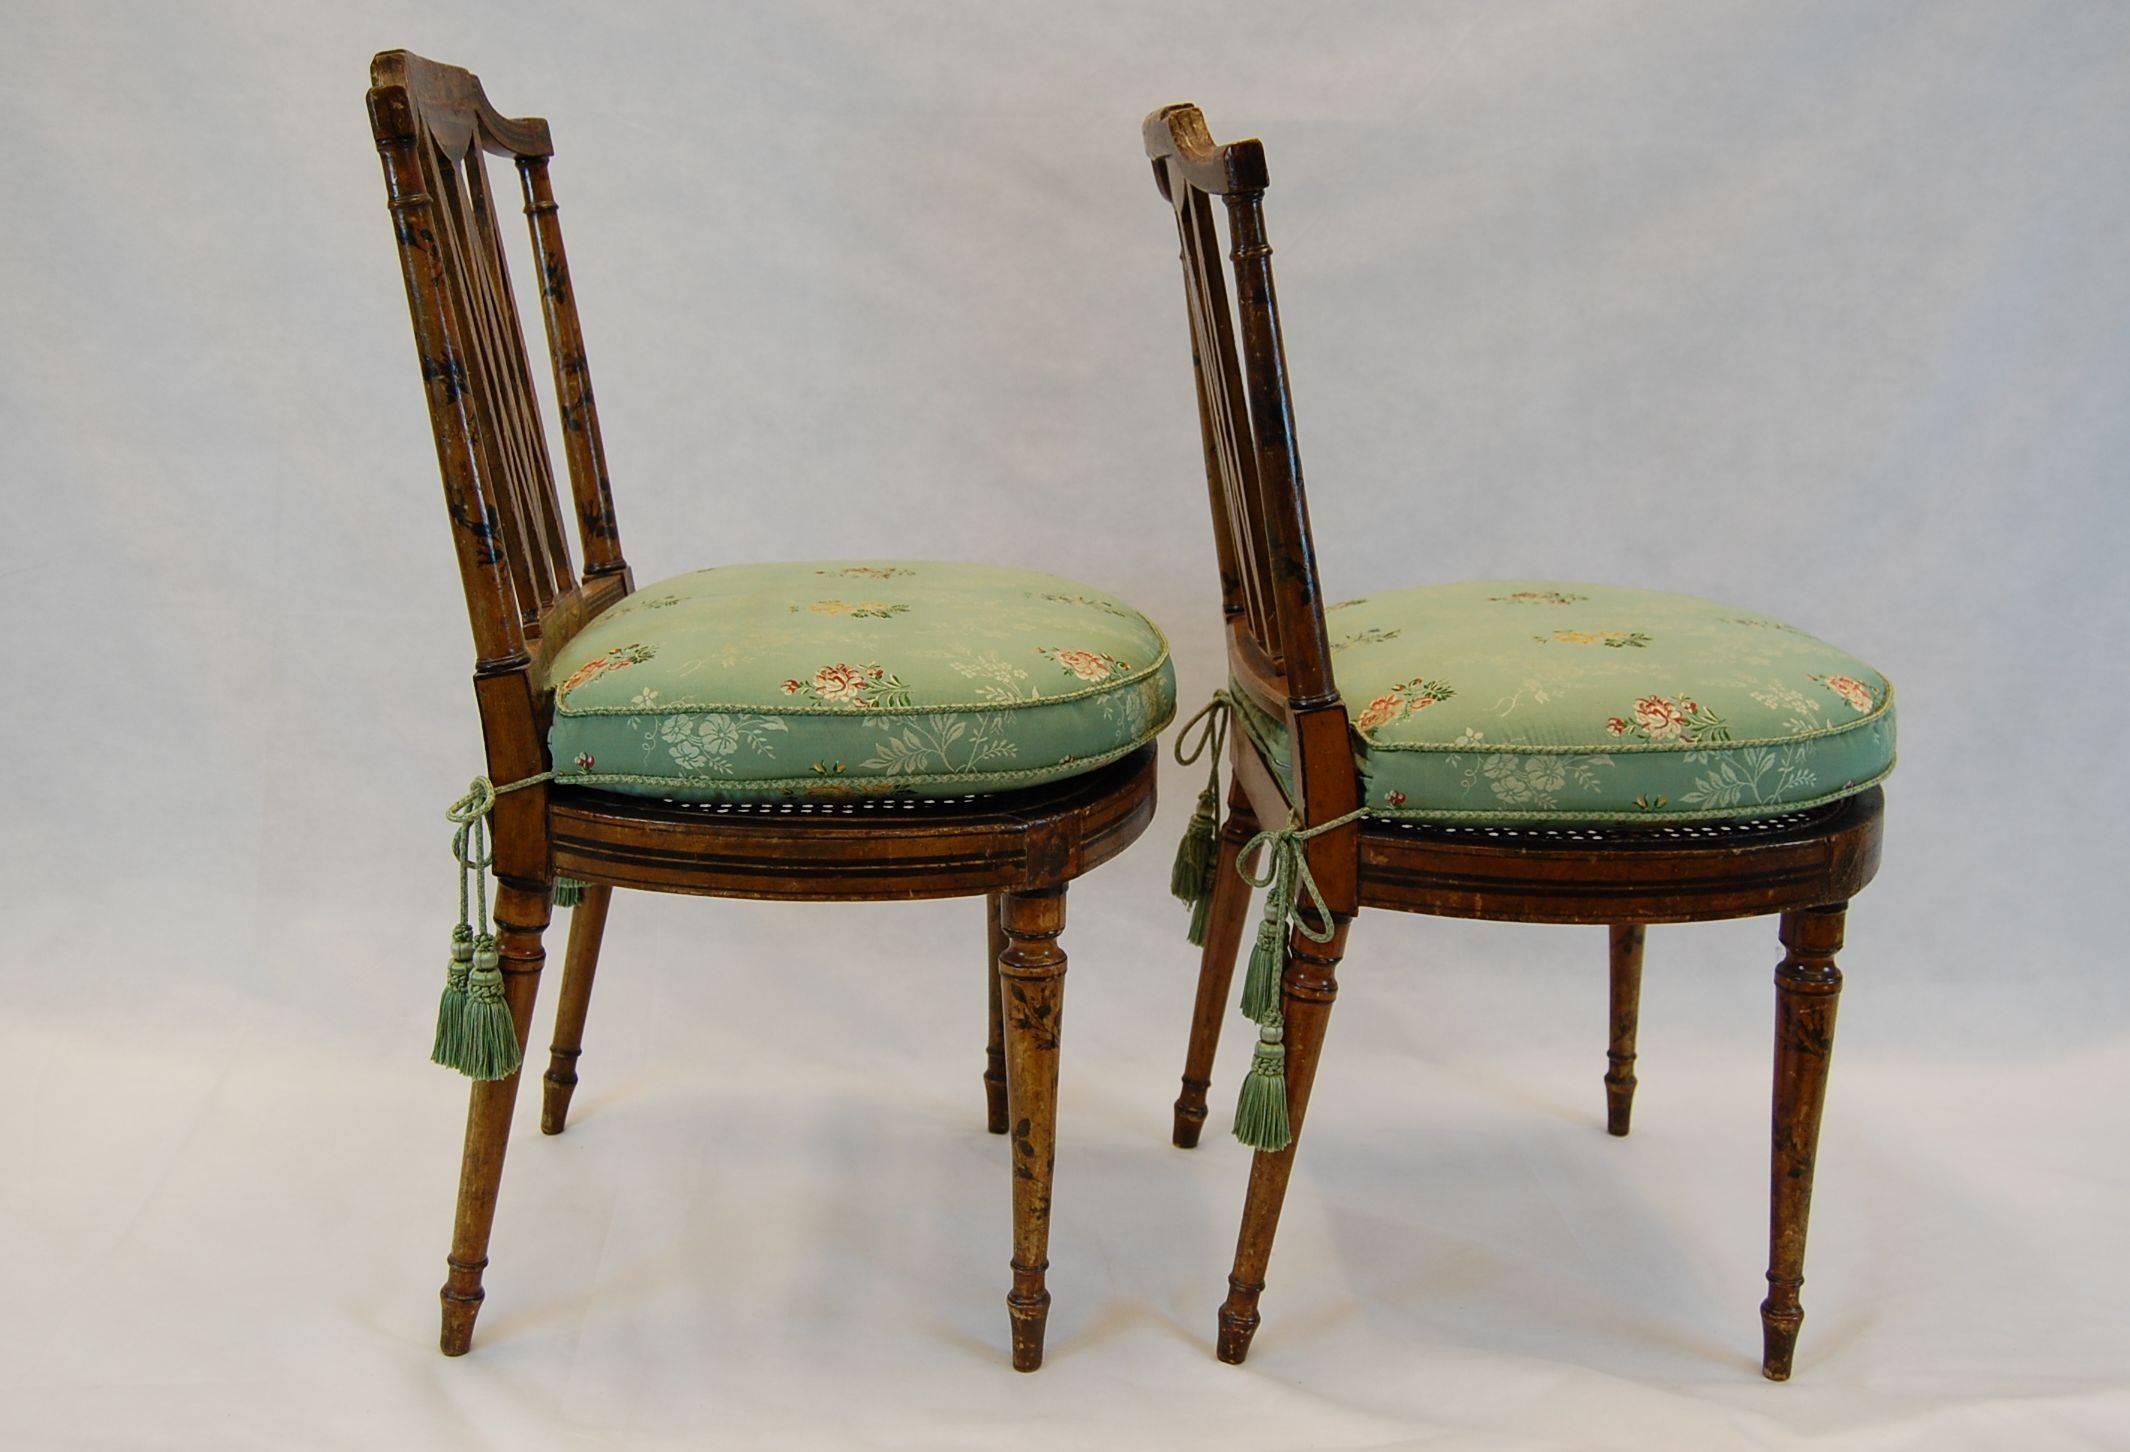 Pair of English Hepplewhite-style side chairs with caned seats and pads. The fabric is silk brocade by Clarence House with silk chair tie tassels. The inserts are down-filled. Beautifully decorated frames in the style of Angelica Kauffman, late